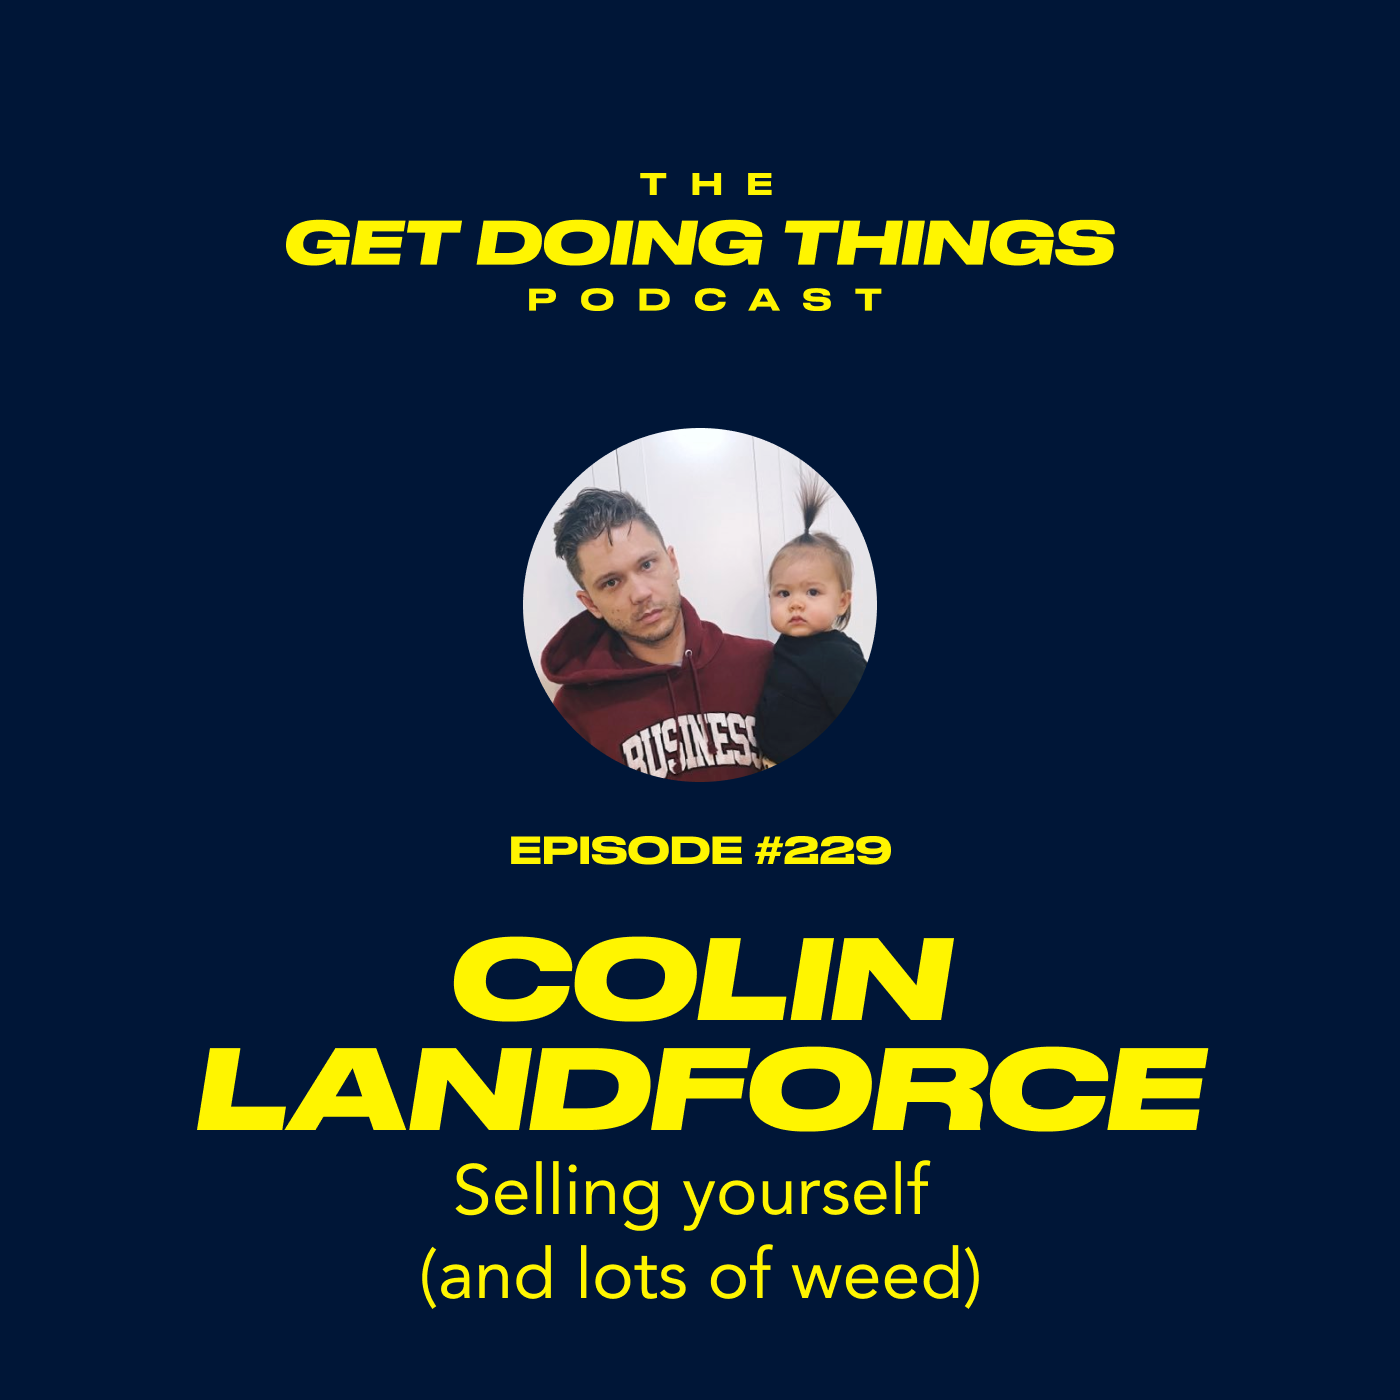 Colin Landforce - Selling yourself (and lots of weed)